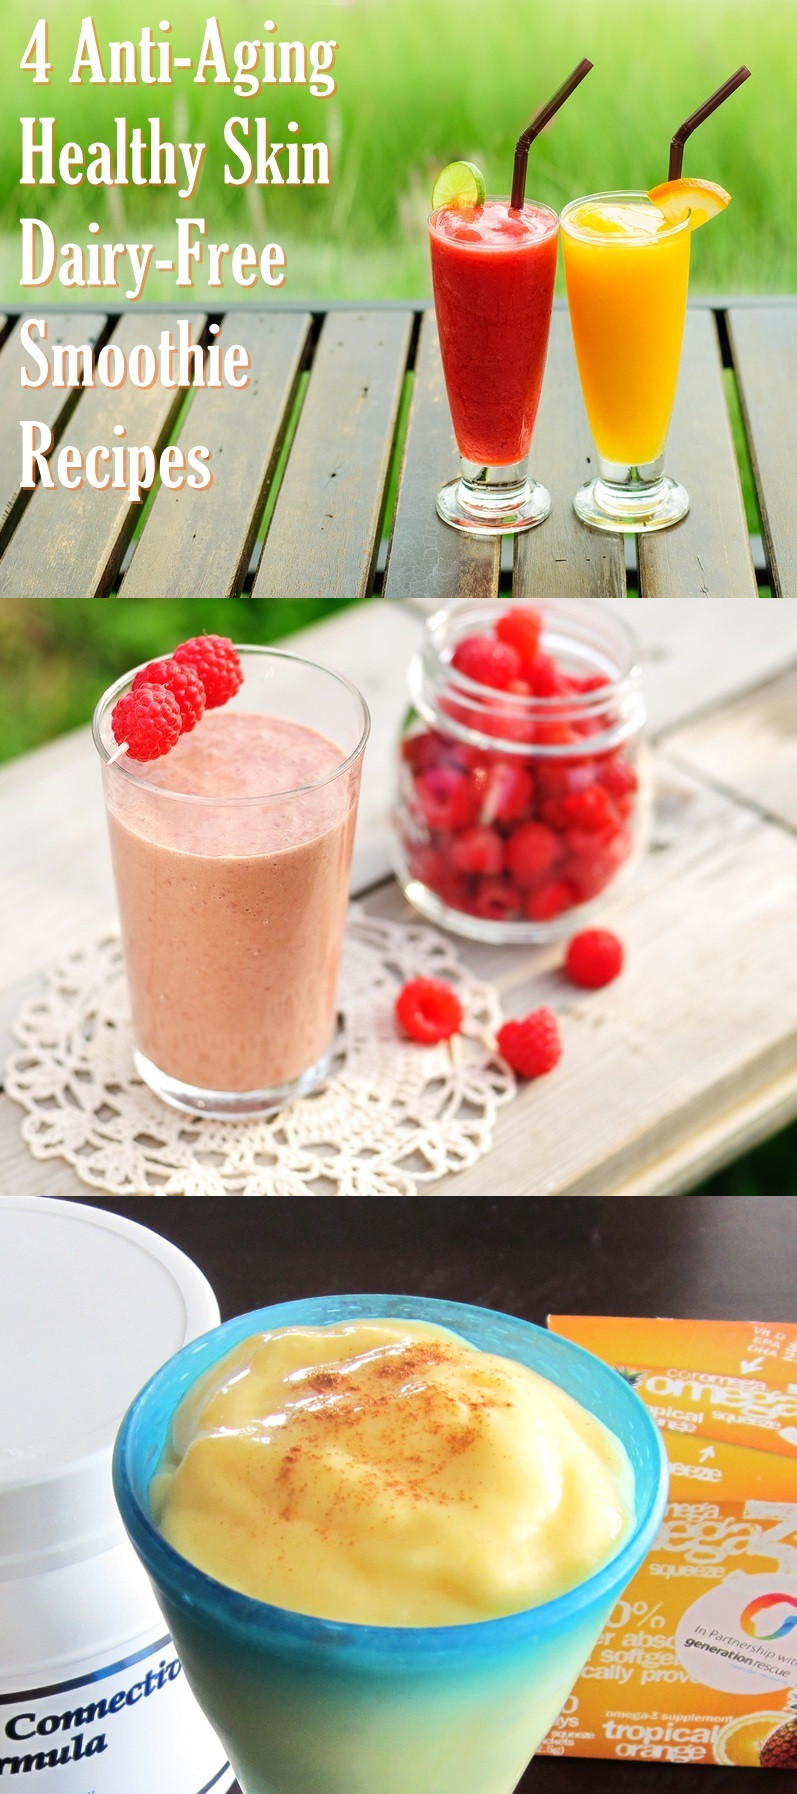 Dairy Free Smoothie Recipes
 4 Anti Aging Dairy Free and Healthy Skin Smoothie Recipes